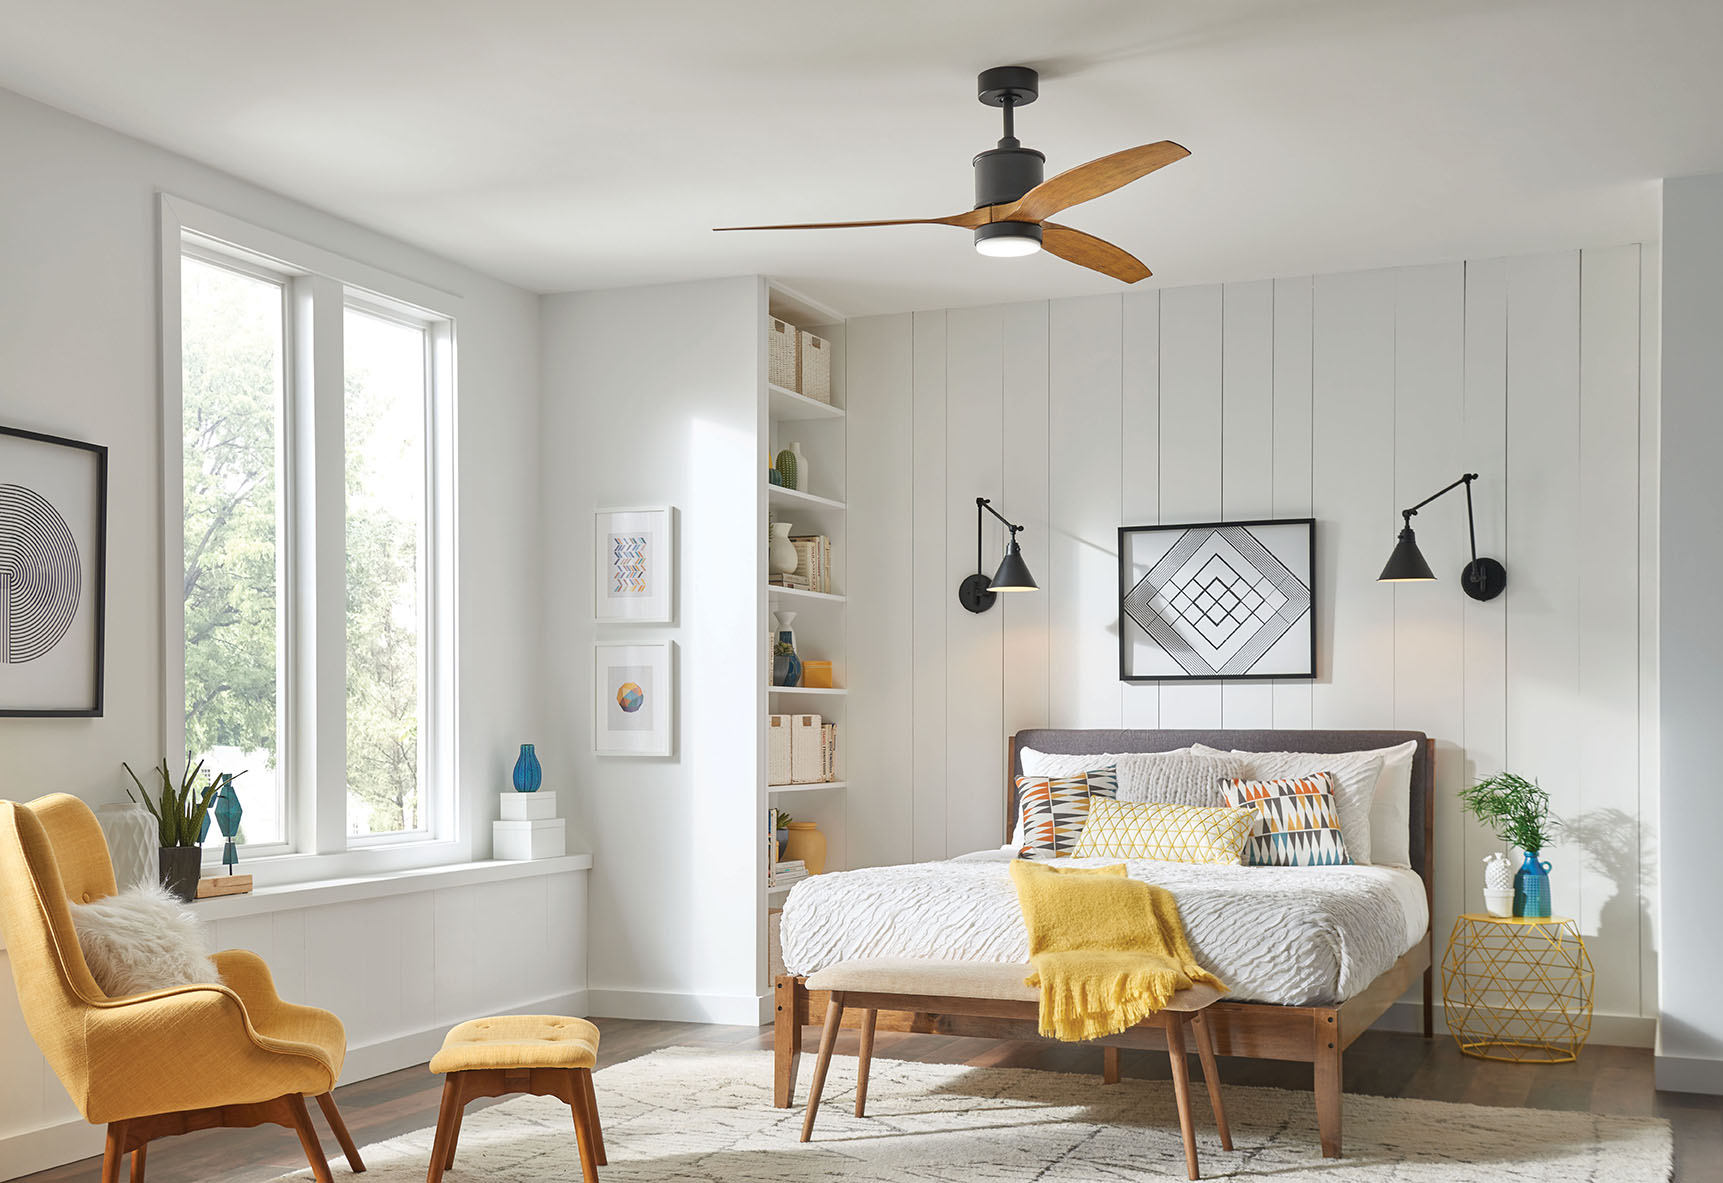 Hover LED Ceiling Fan in a bedroom.